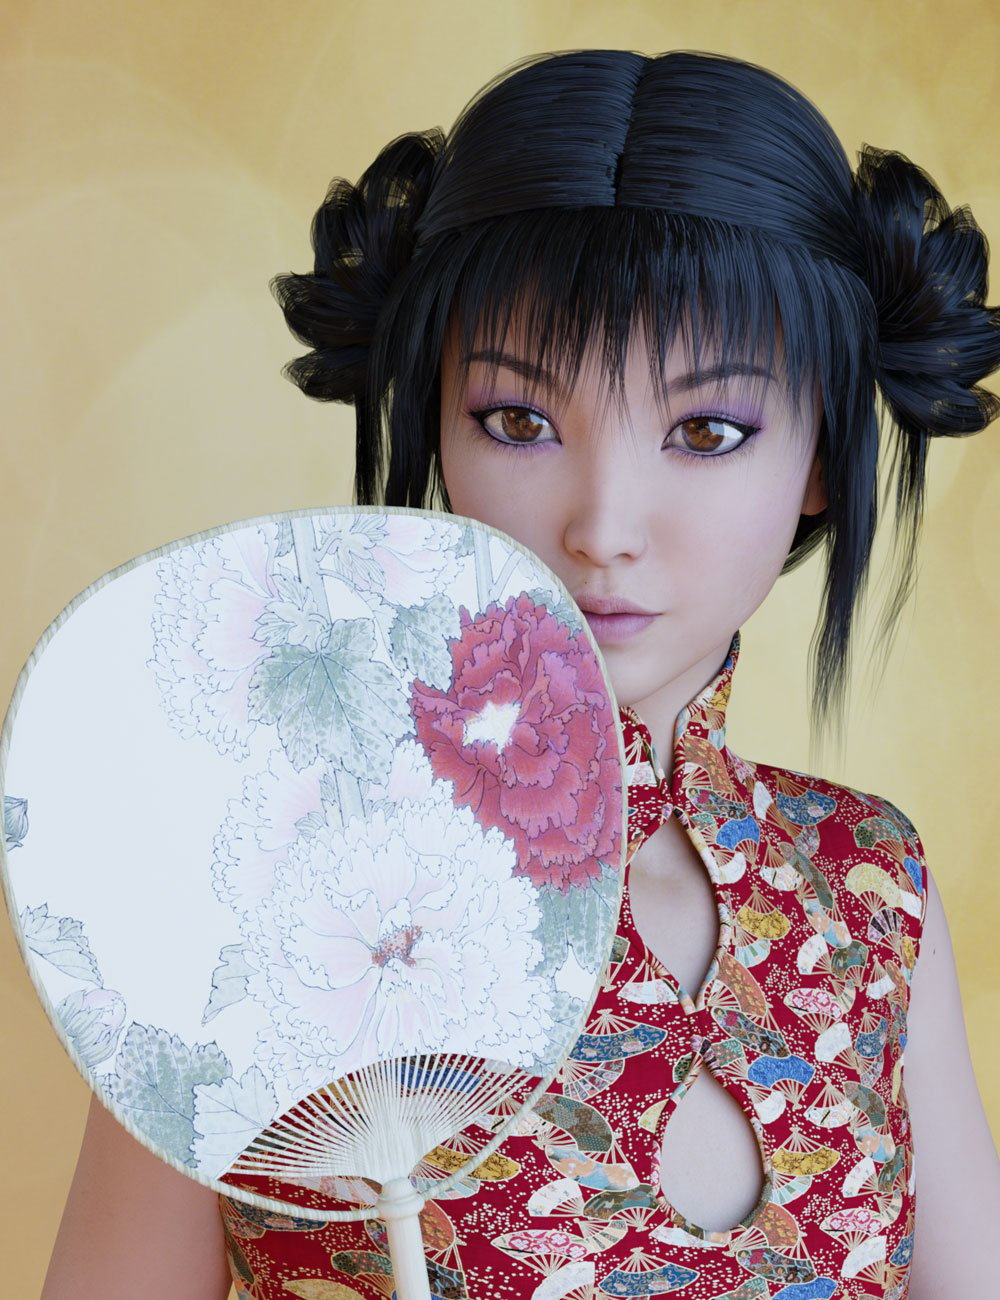 Oriental Umbrella and Fans by: Prae, 3D Models by Daz 3D